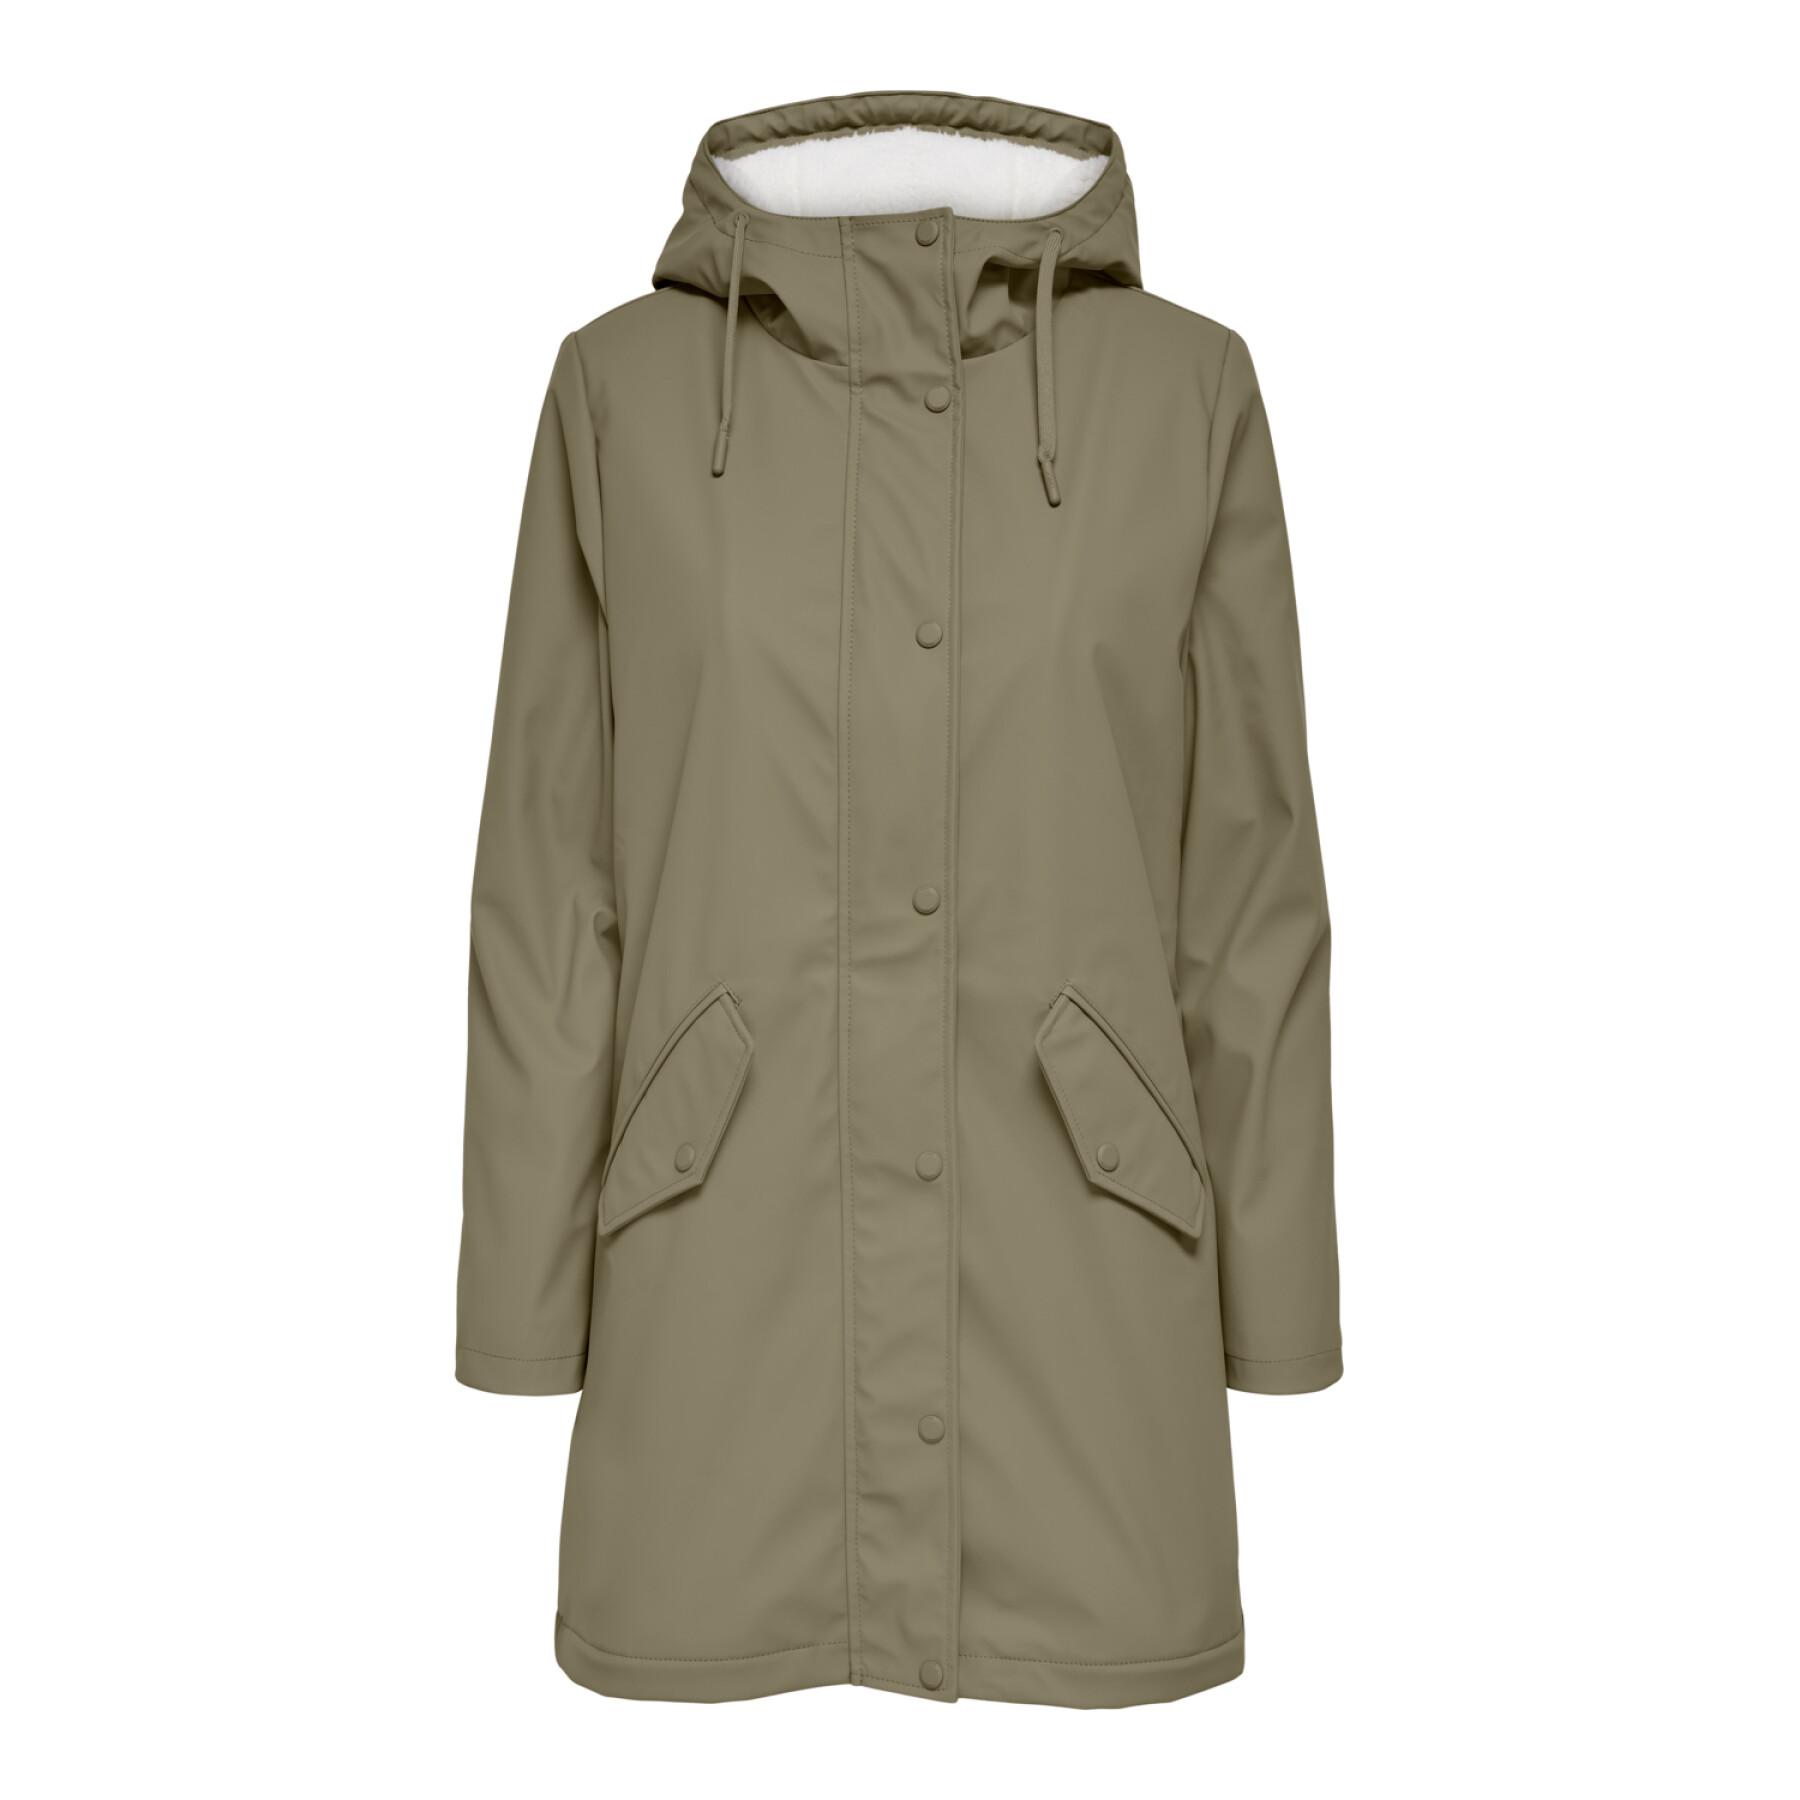 Women's parka Only Onlsally Noos